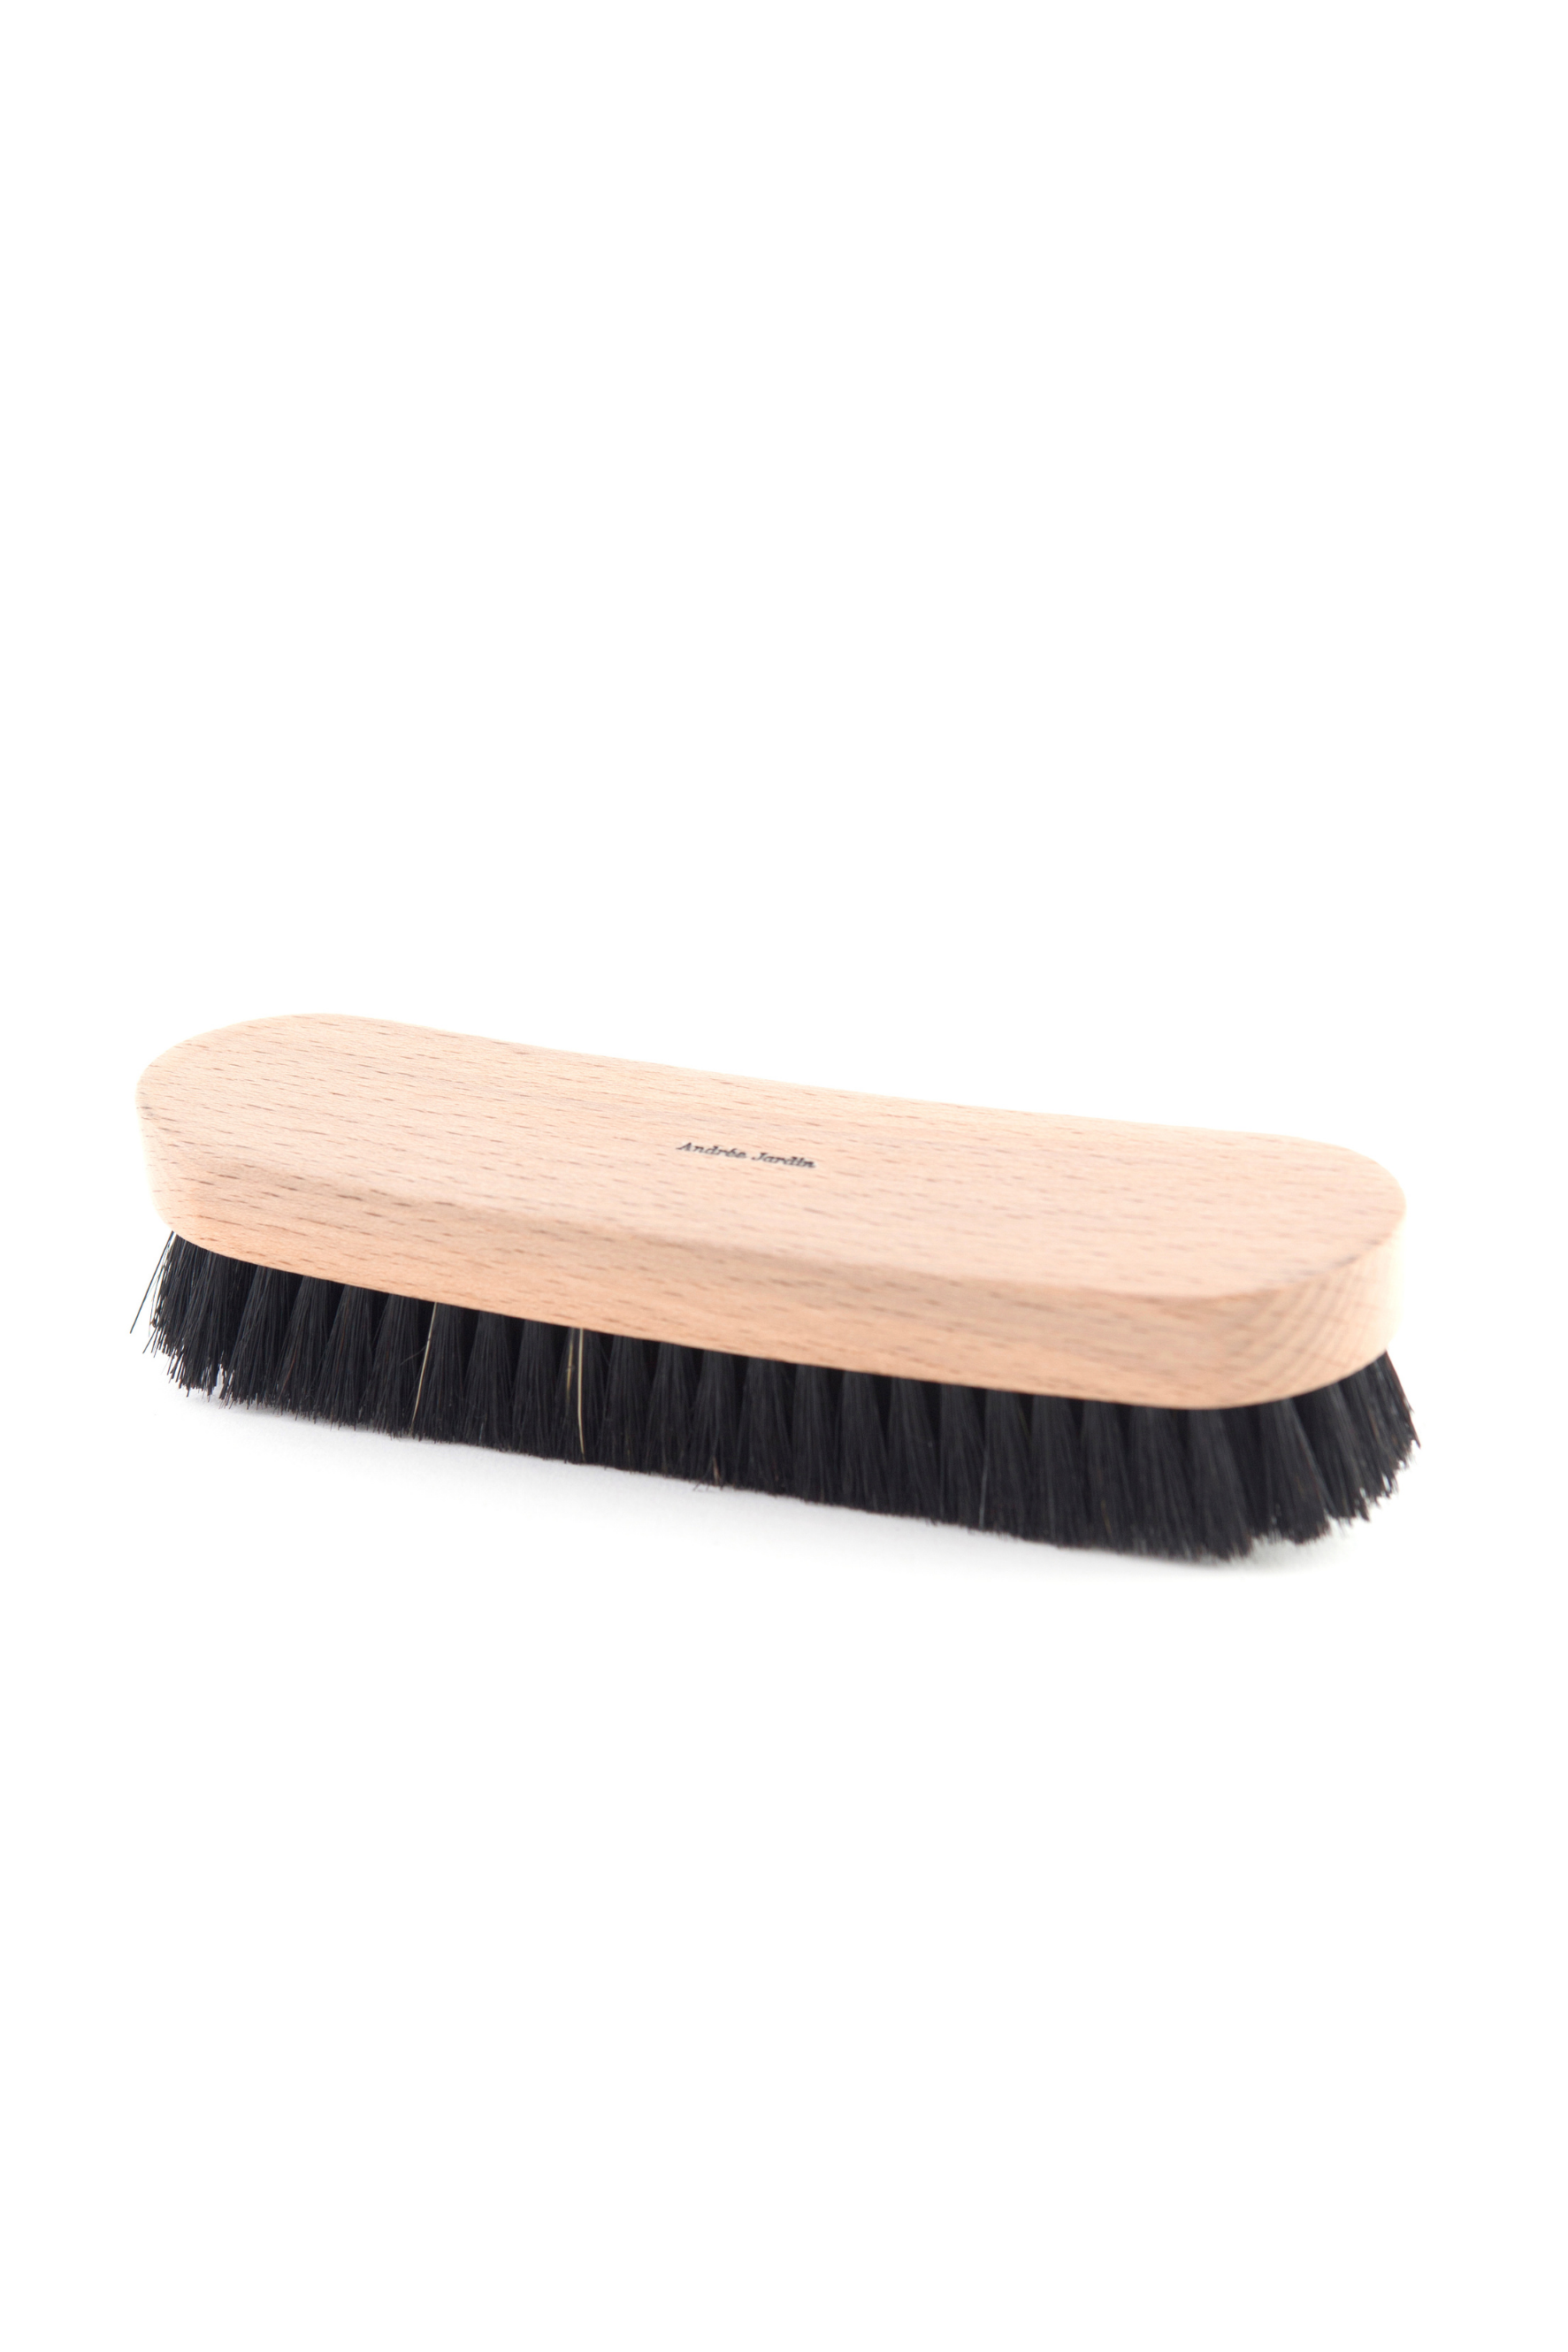 Andrée Jardin Tradition Clothing Brush - Utilities - Andrée Jardin - Andrée Jardin - Brand_Andrée Jardin - Home_Broom Sets - Home_Household Cleaning - Shoe & Textile Brushes - image_3d014430-5acc-443b-ba0e-35e0072b8da6